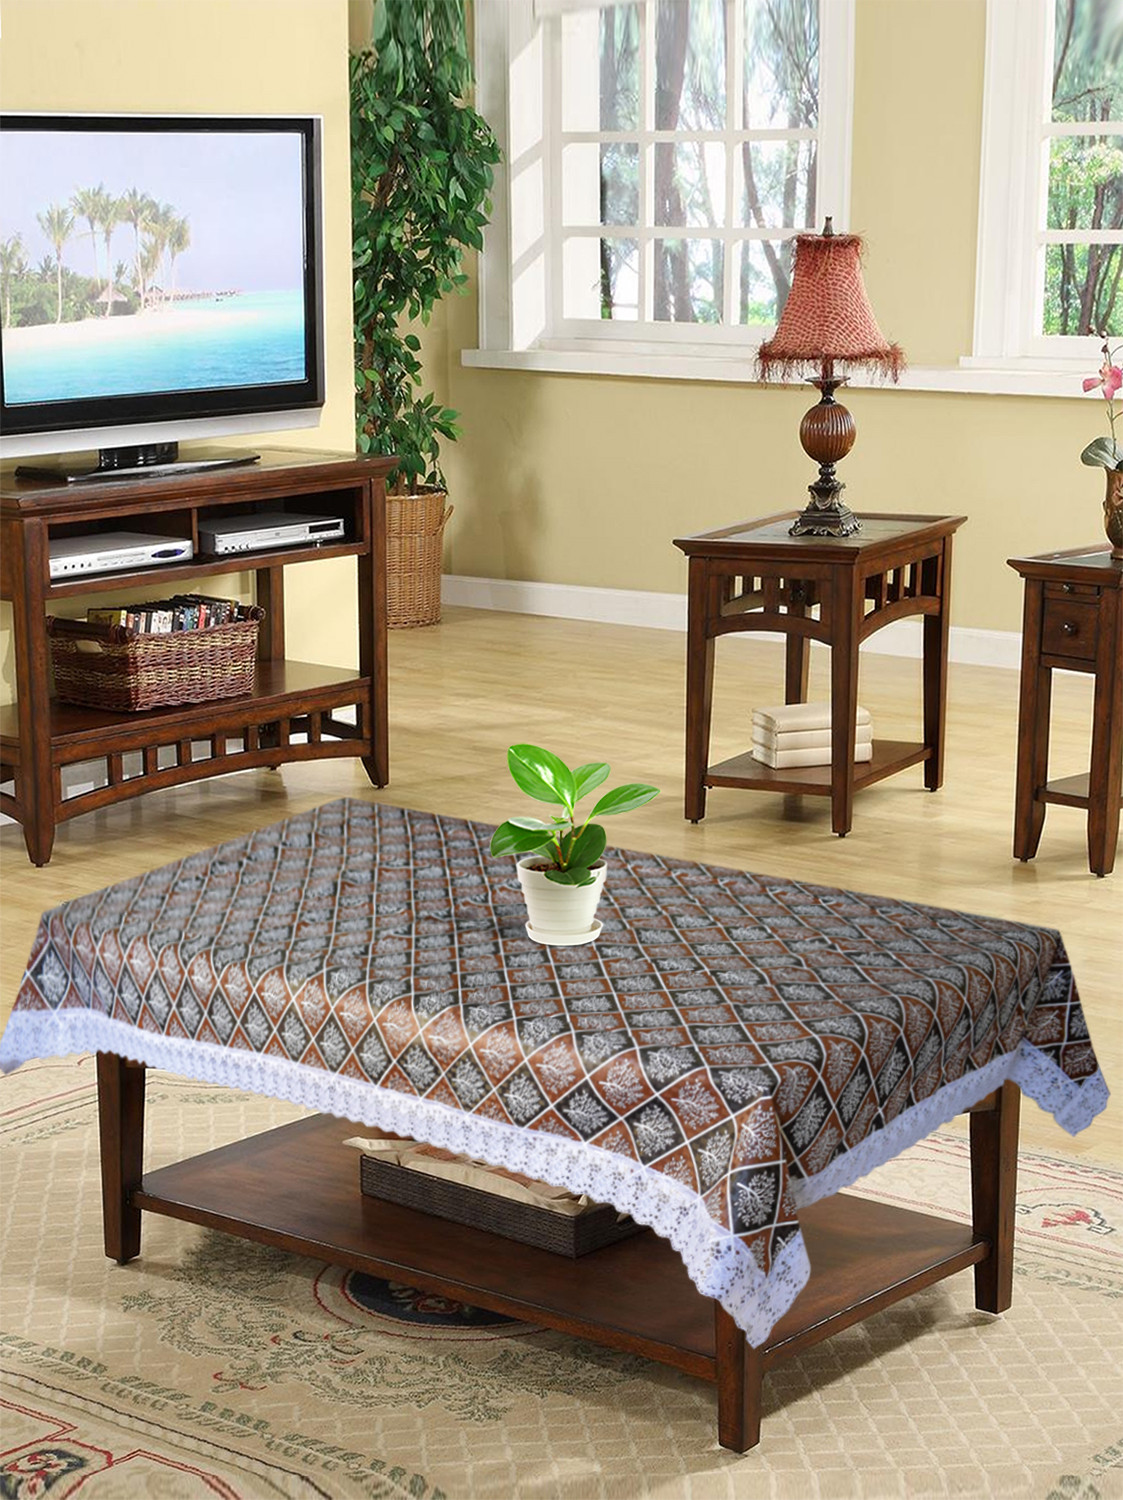 Kuber Industries Leaf Printed PVC 4 Seater Center Table Cover, Protector With White Lace Border, 40